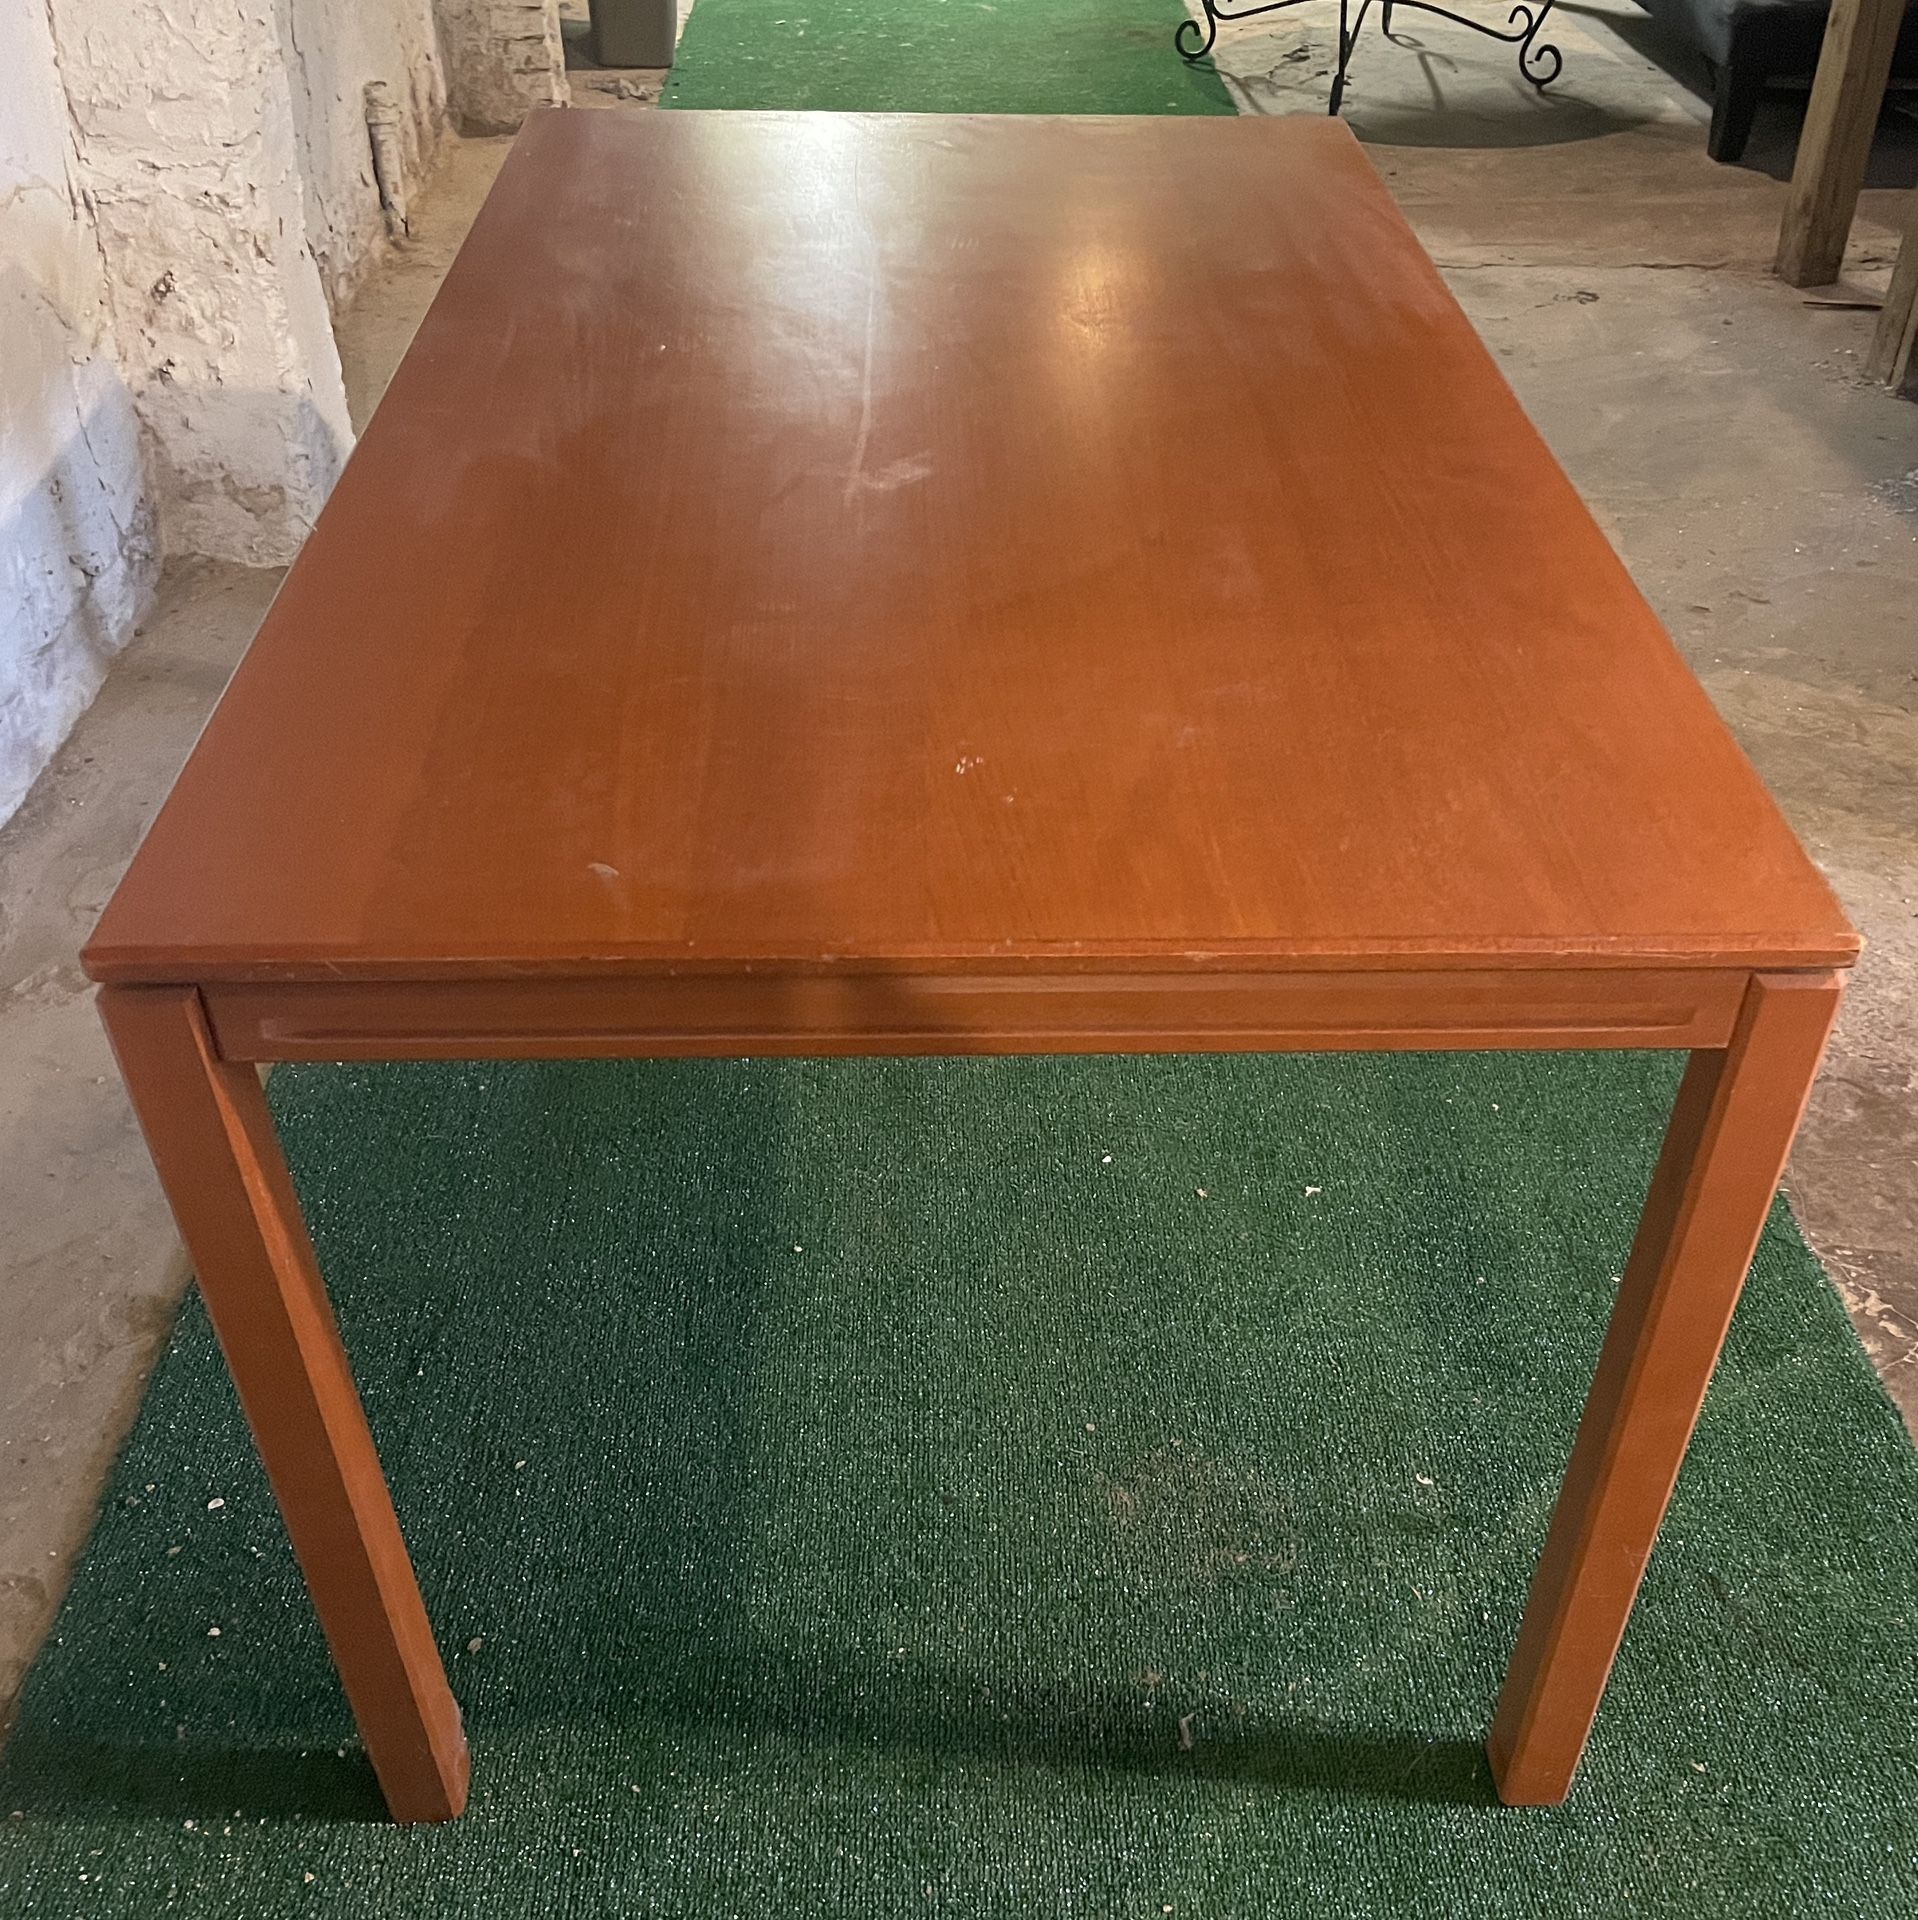 Kitchen Table - Short - 25.5” tall 4’ 9” long 35.5” wide - FEW MARKS ON TOP